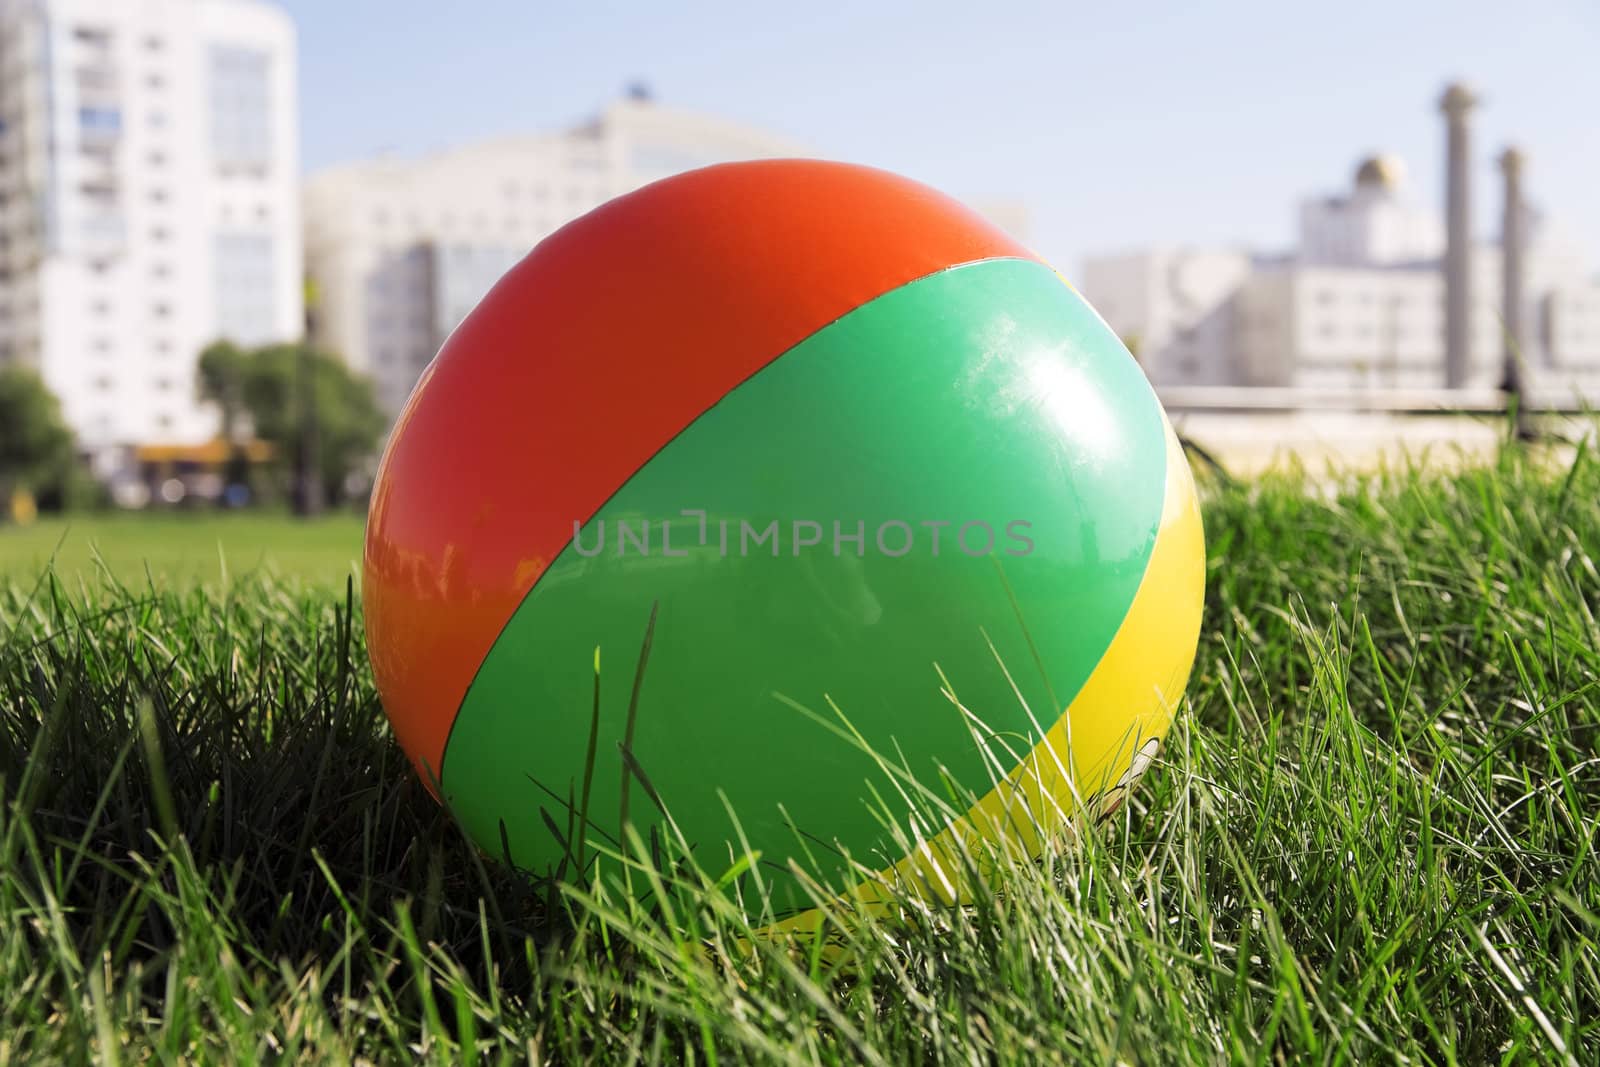 ball for outdoor games lying on grass in city park by Serp